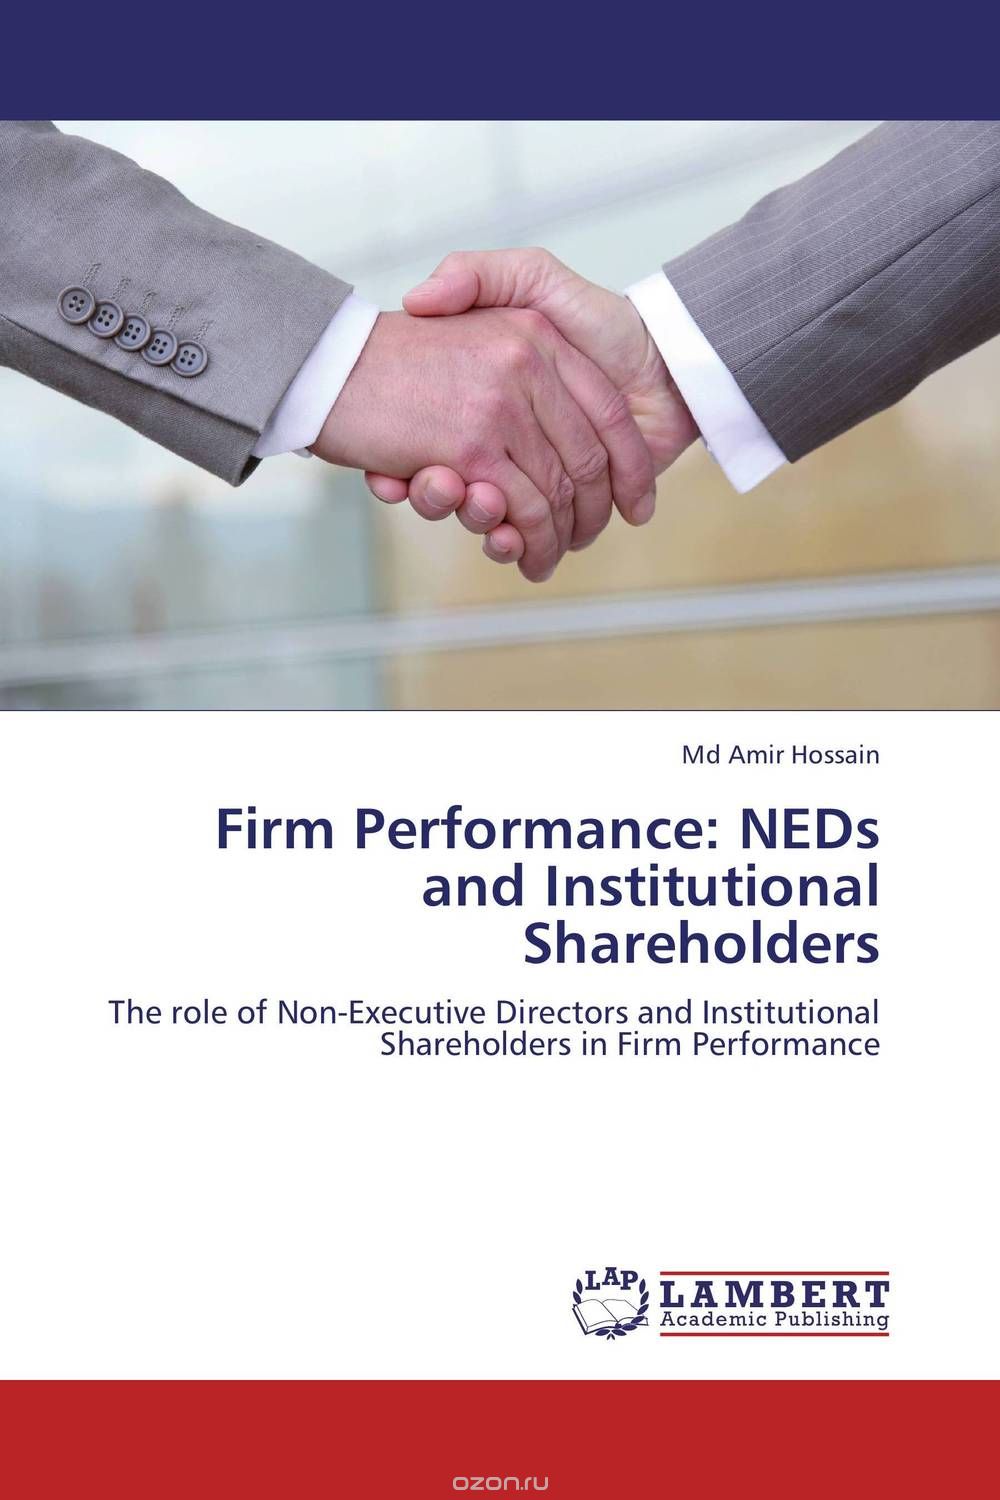 Firm Performance: NEDs and Institutional Shareholders